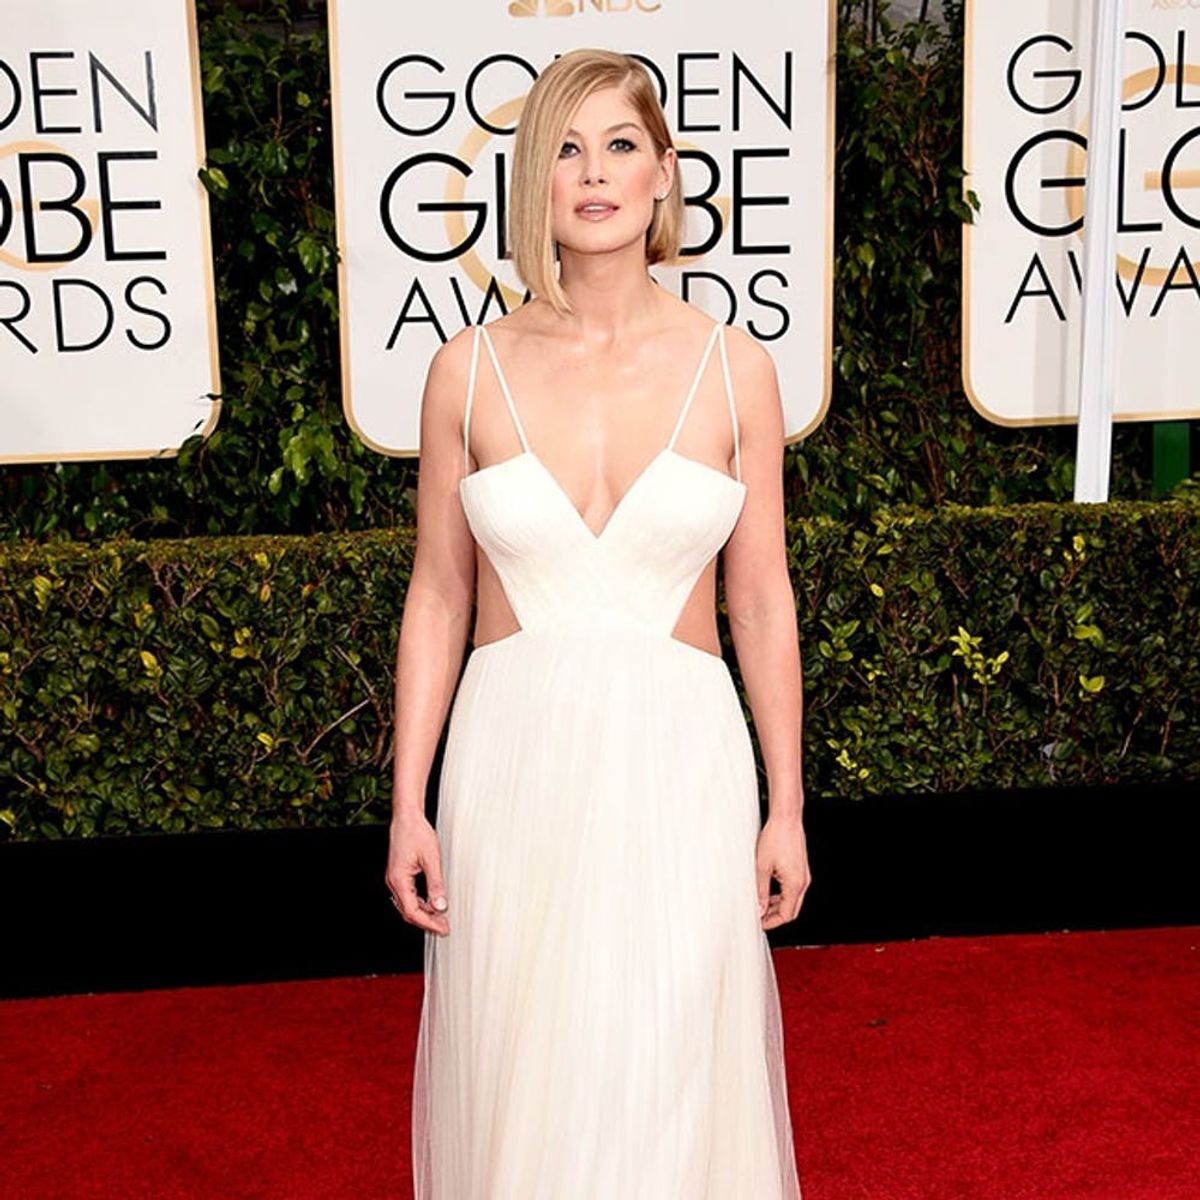 12 of the Top Red Carpet Trends from This Year’s Golden Globes